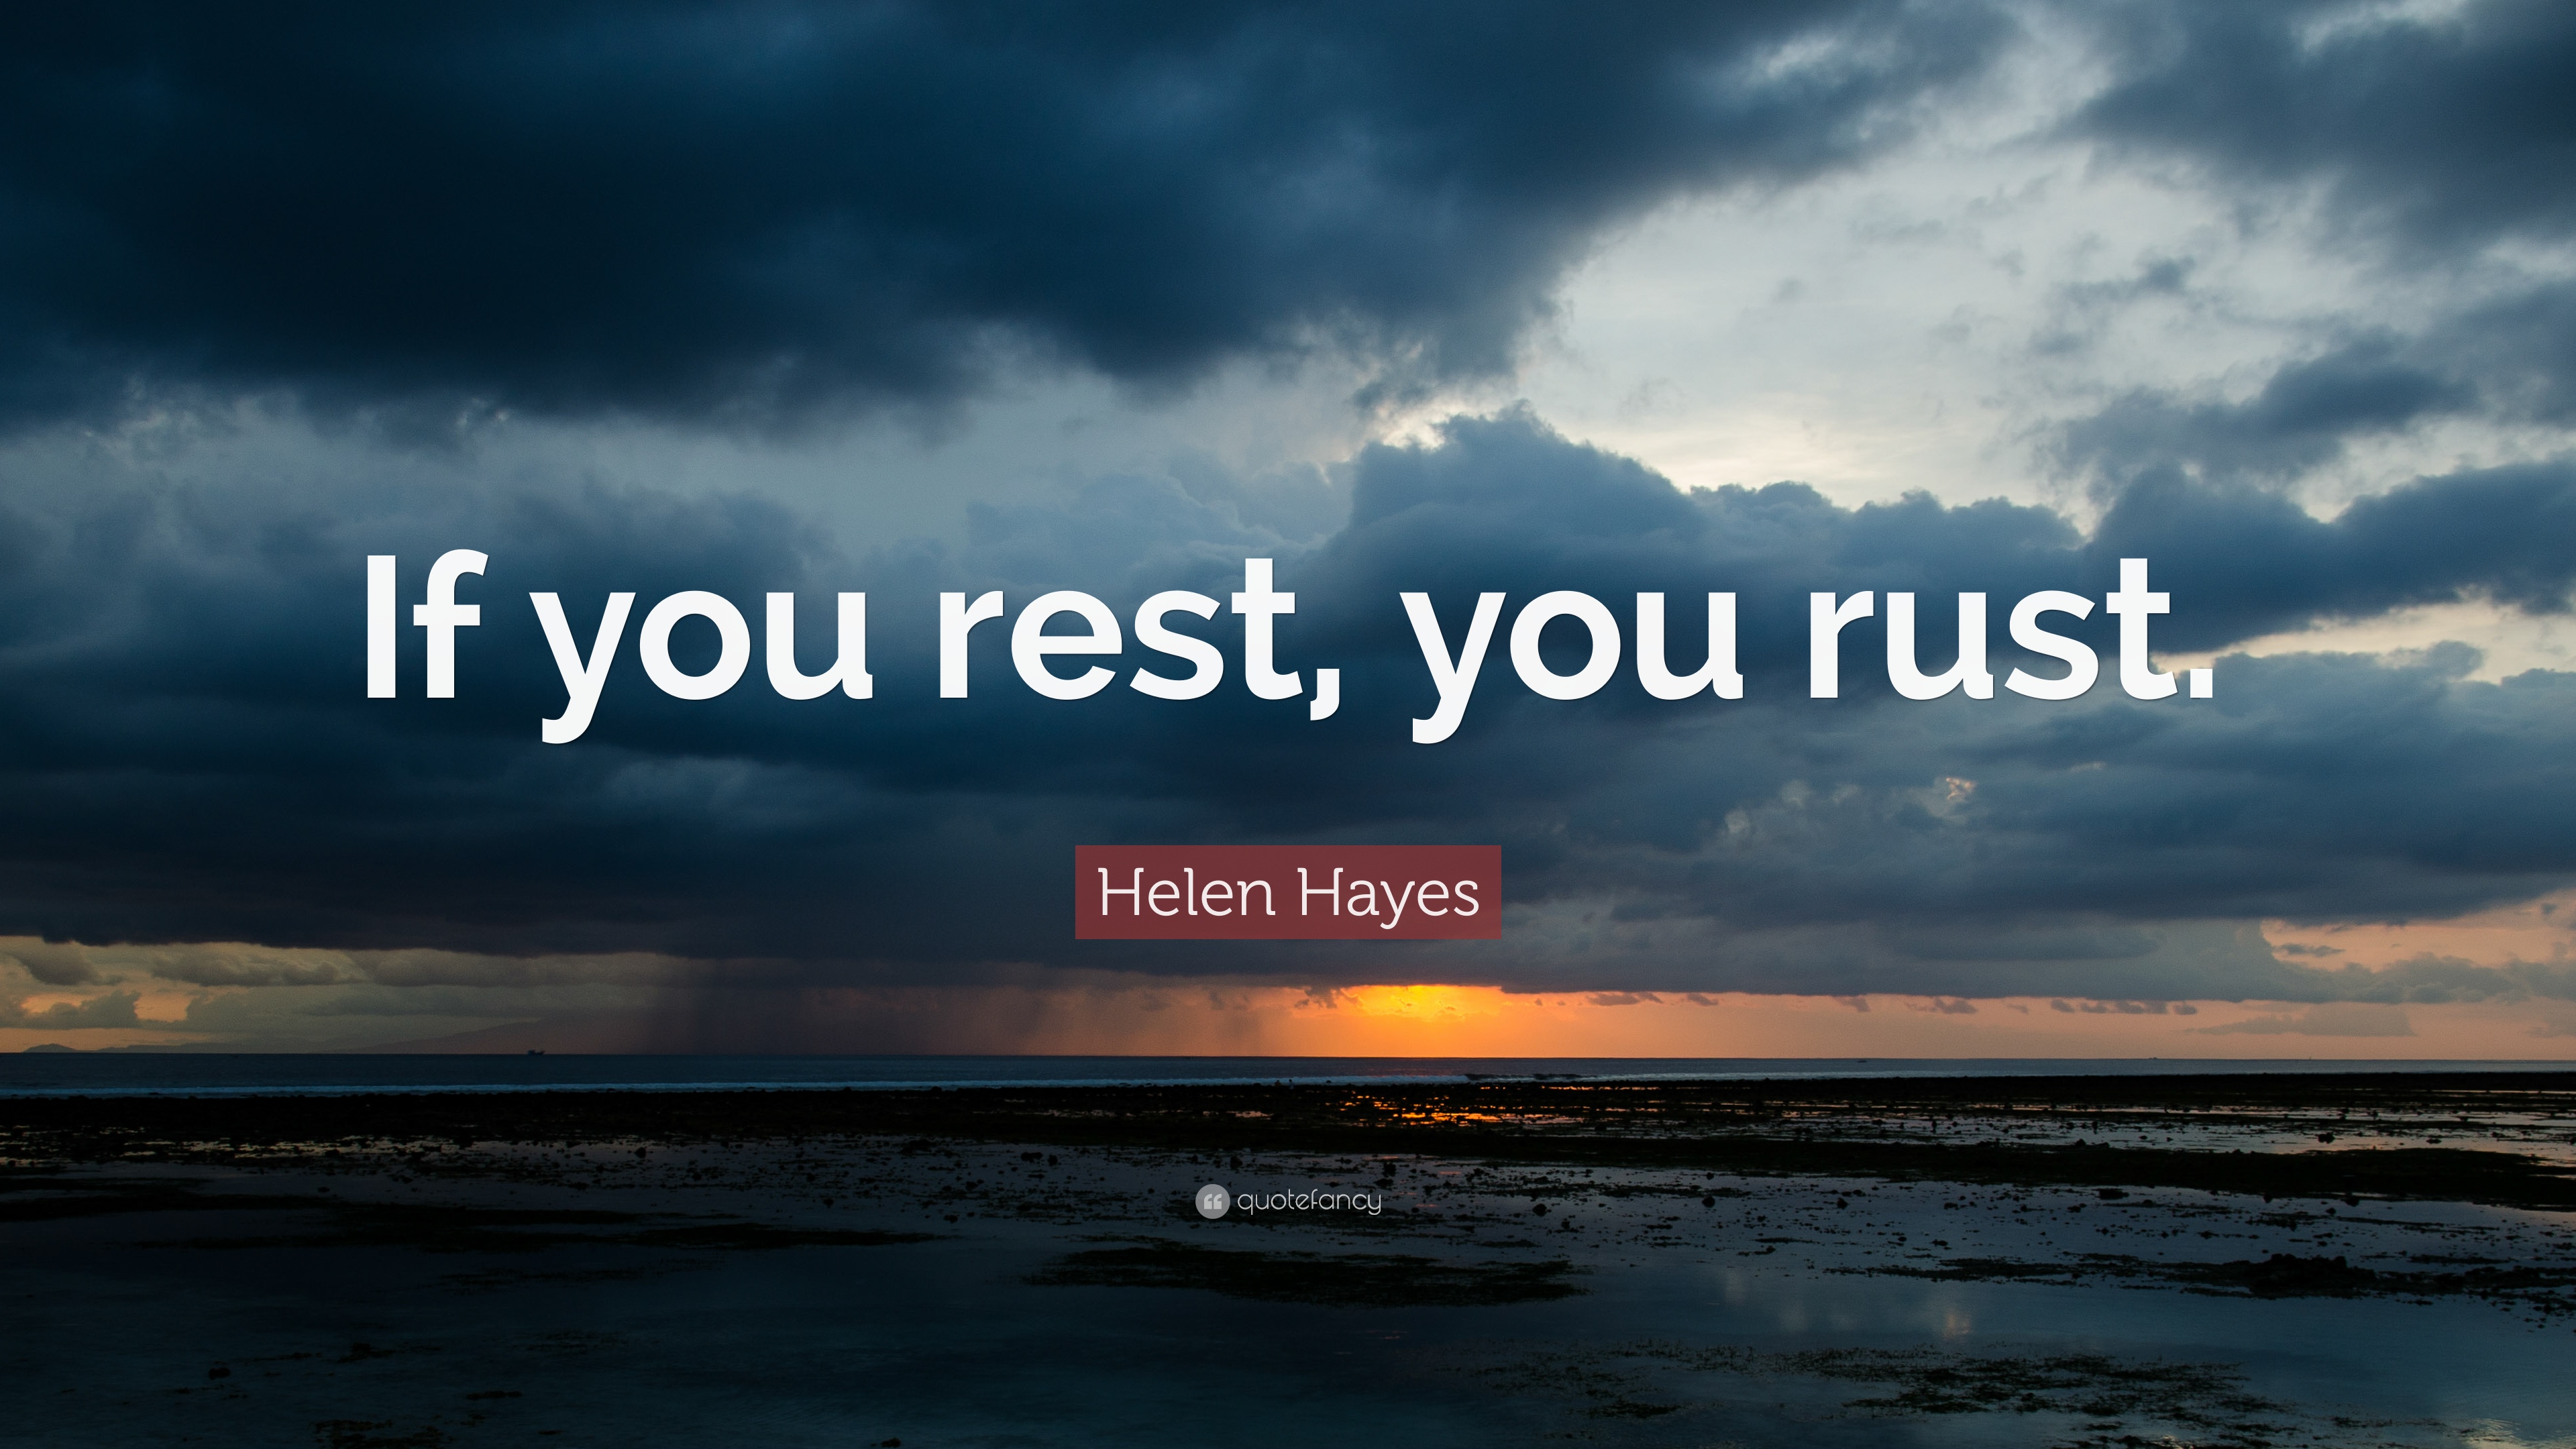 Helen Hayes Quote: “If you rest, you rust.” 12 wallpaper